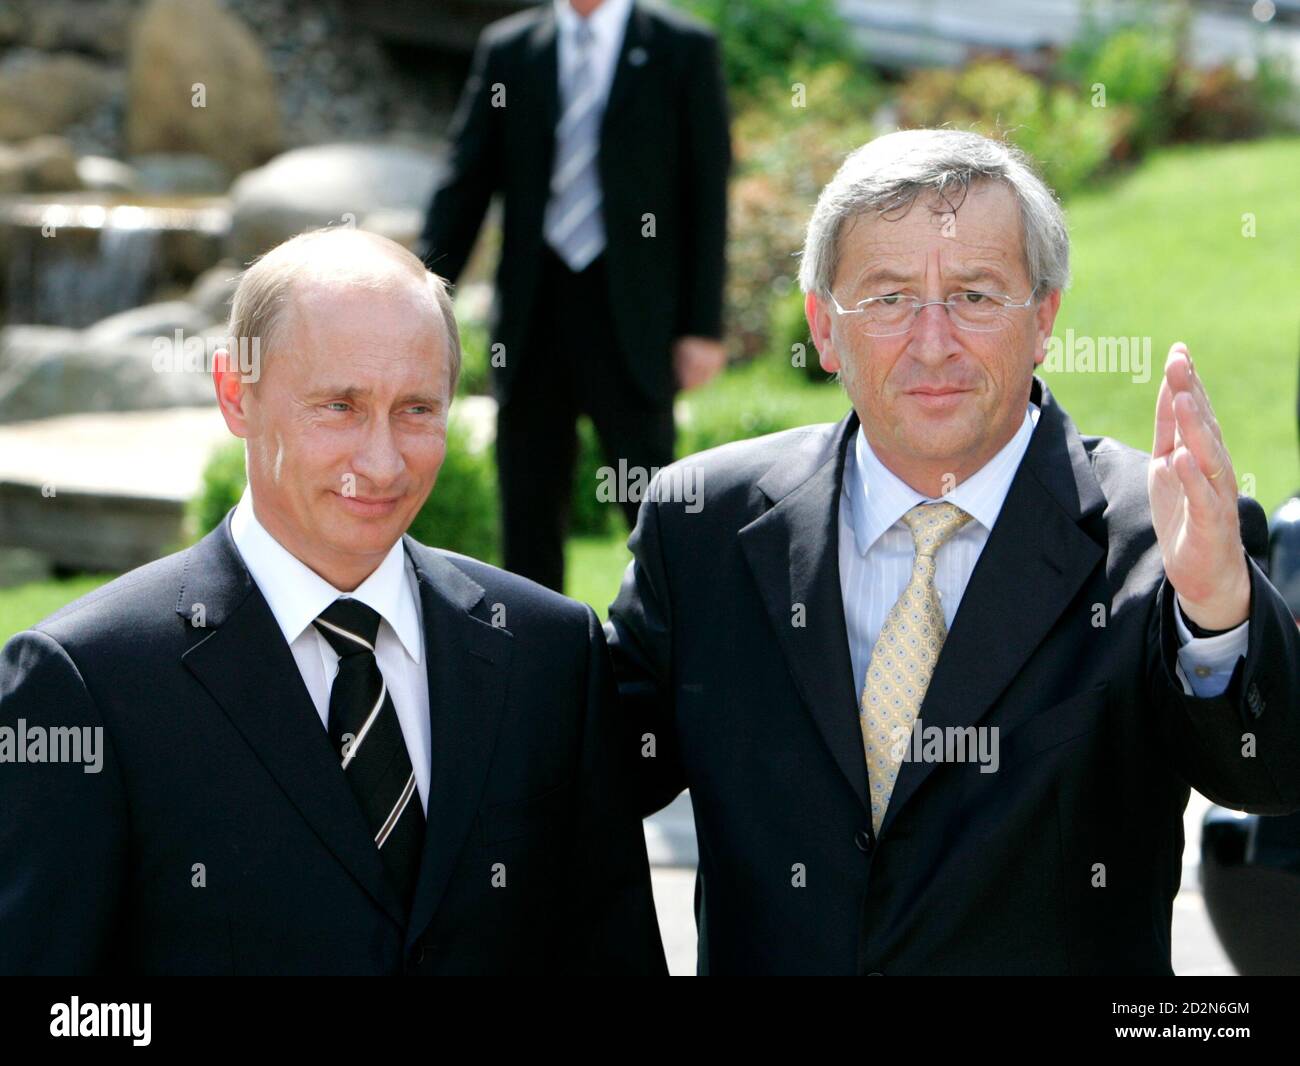 Russia's President Vladimir Putin (L) and Luxembourg's Prime Minister Jean-Claude  Juncker arrive at the Senningen Castle ahead of a meeting in Luxembourg May  24, 2007. REUTERS/Thierry Roge (LUXEMBOURG Stock Photo - Alamy